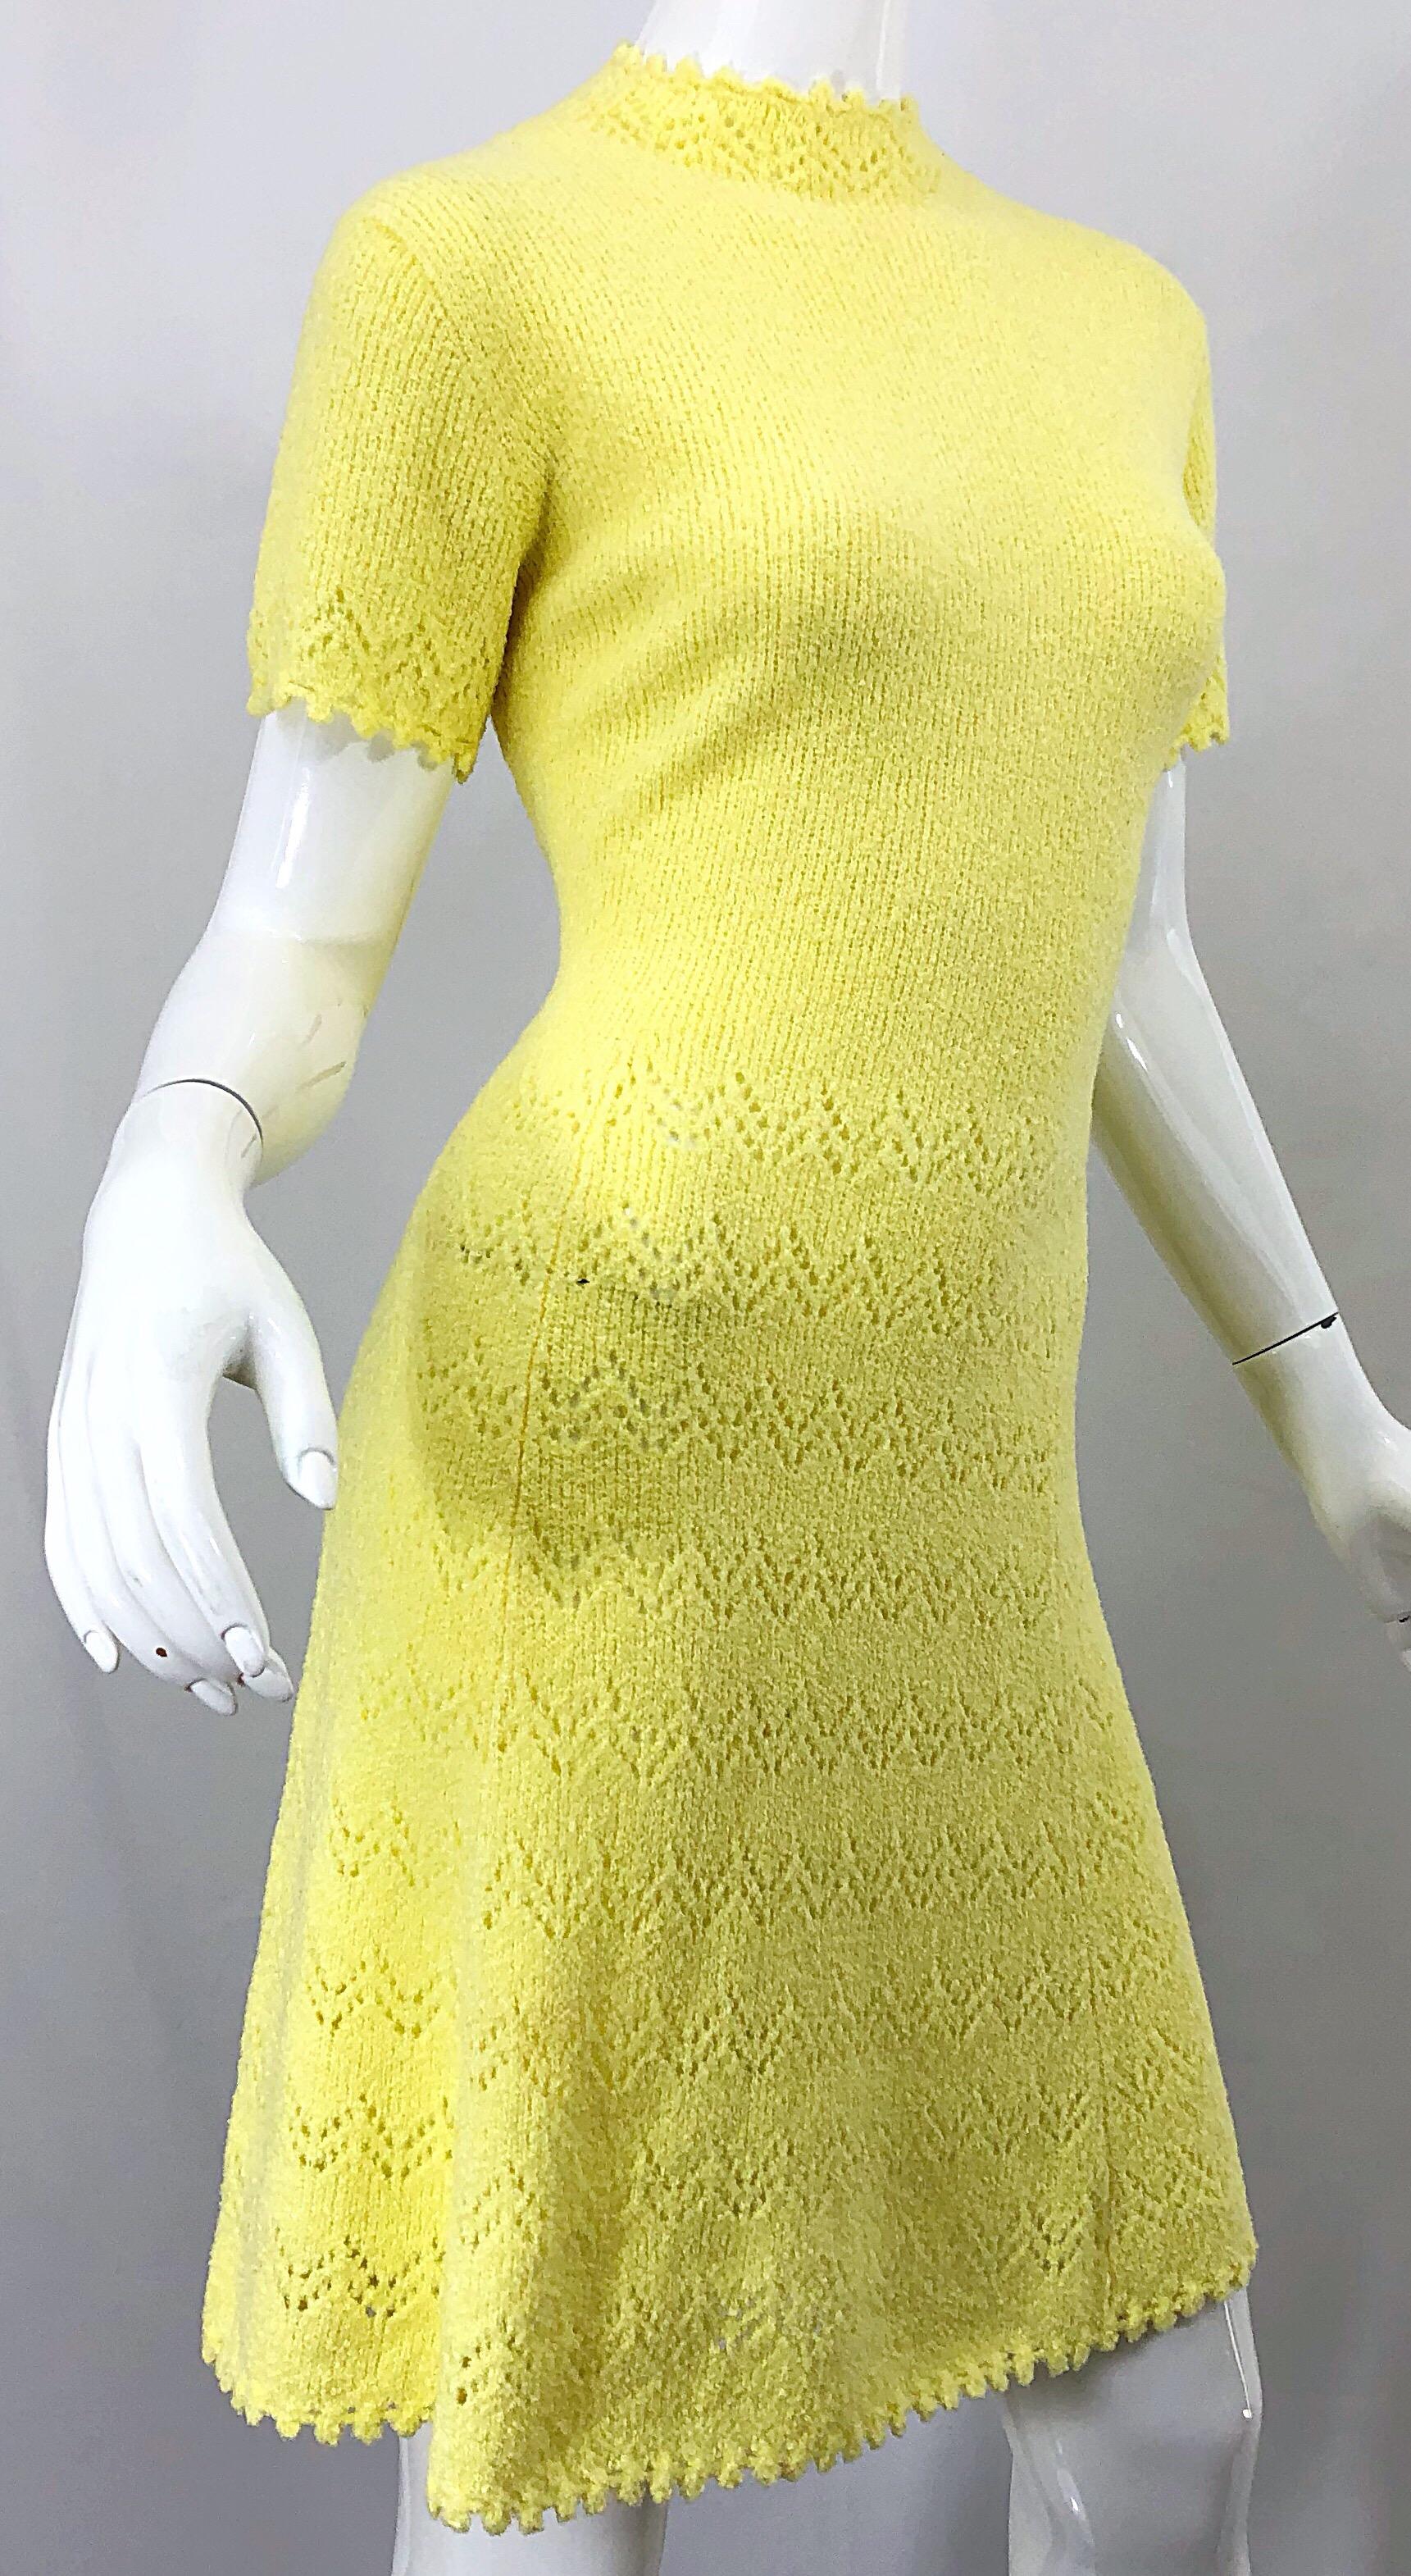 1960s St John Canary Yellow Santana Knit Mod Crochet Vintage A Line 60s Dress In Excellent Condition For Sale In San Diego, CA